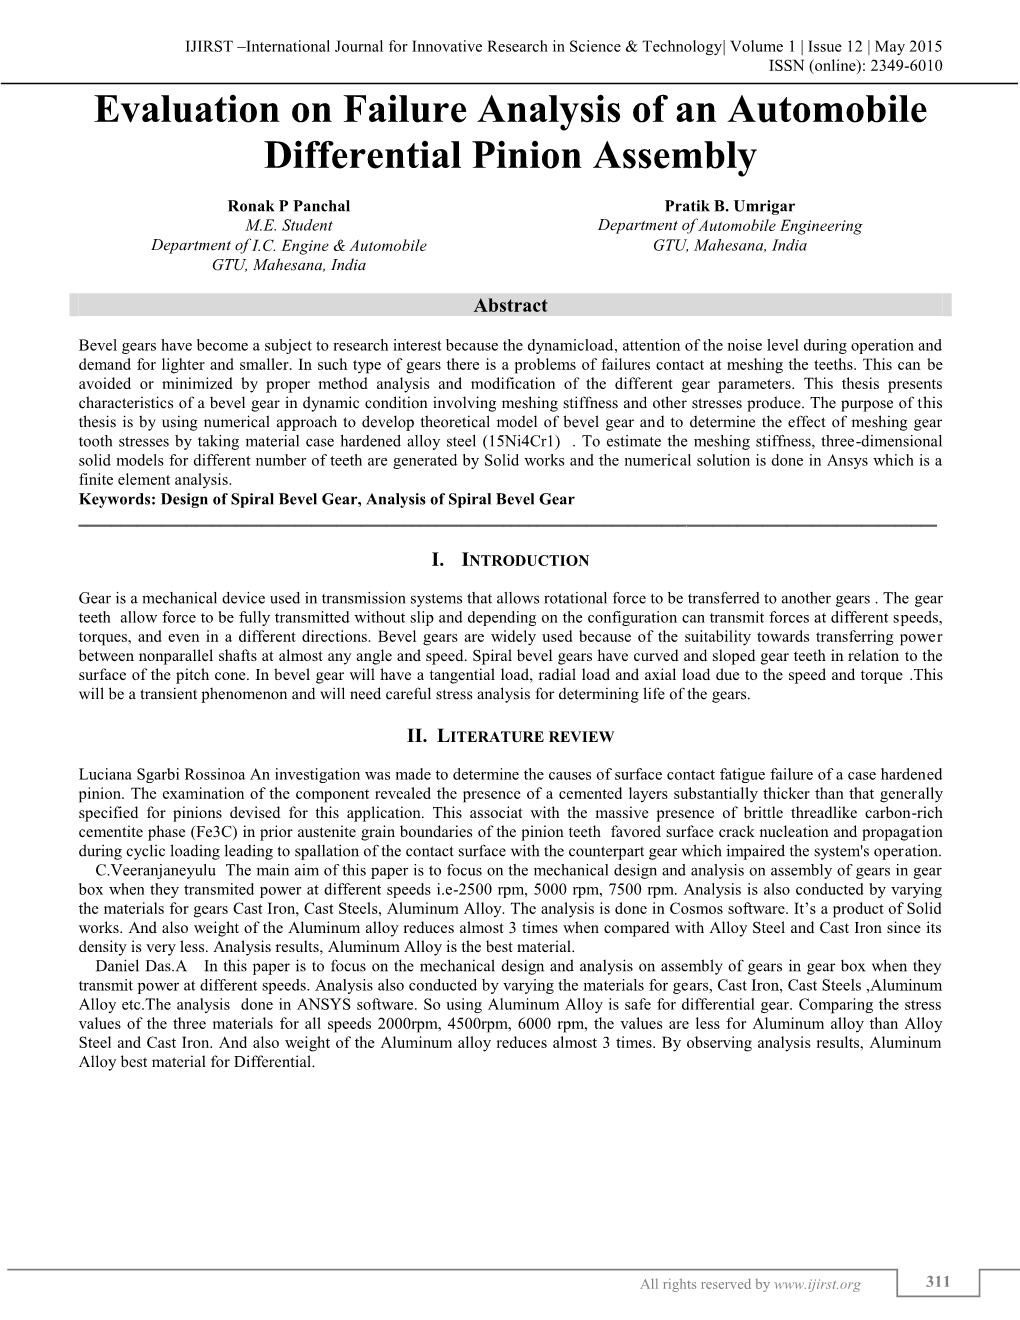 Evaluation on Failure Analysis of an Automobile Differential Pinion Assembly (IJIRST/ Volume 1 / Issue 12 / 054)